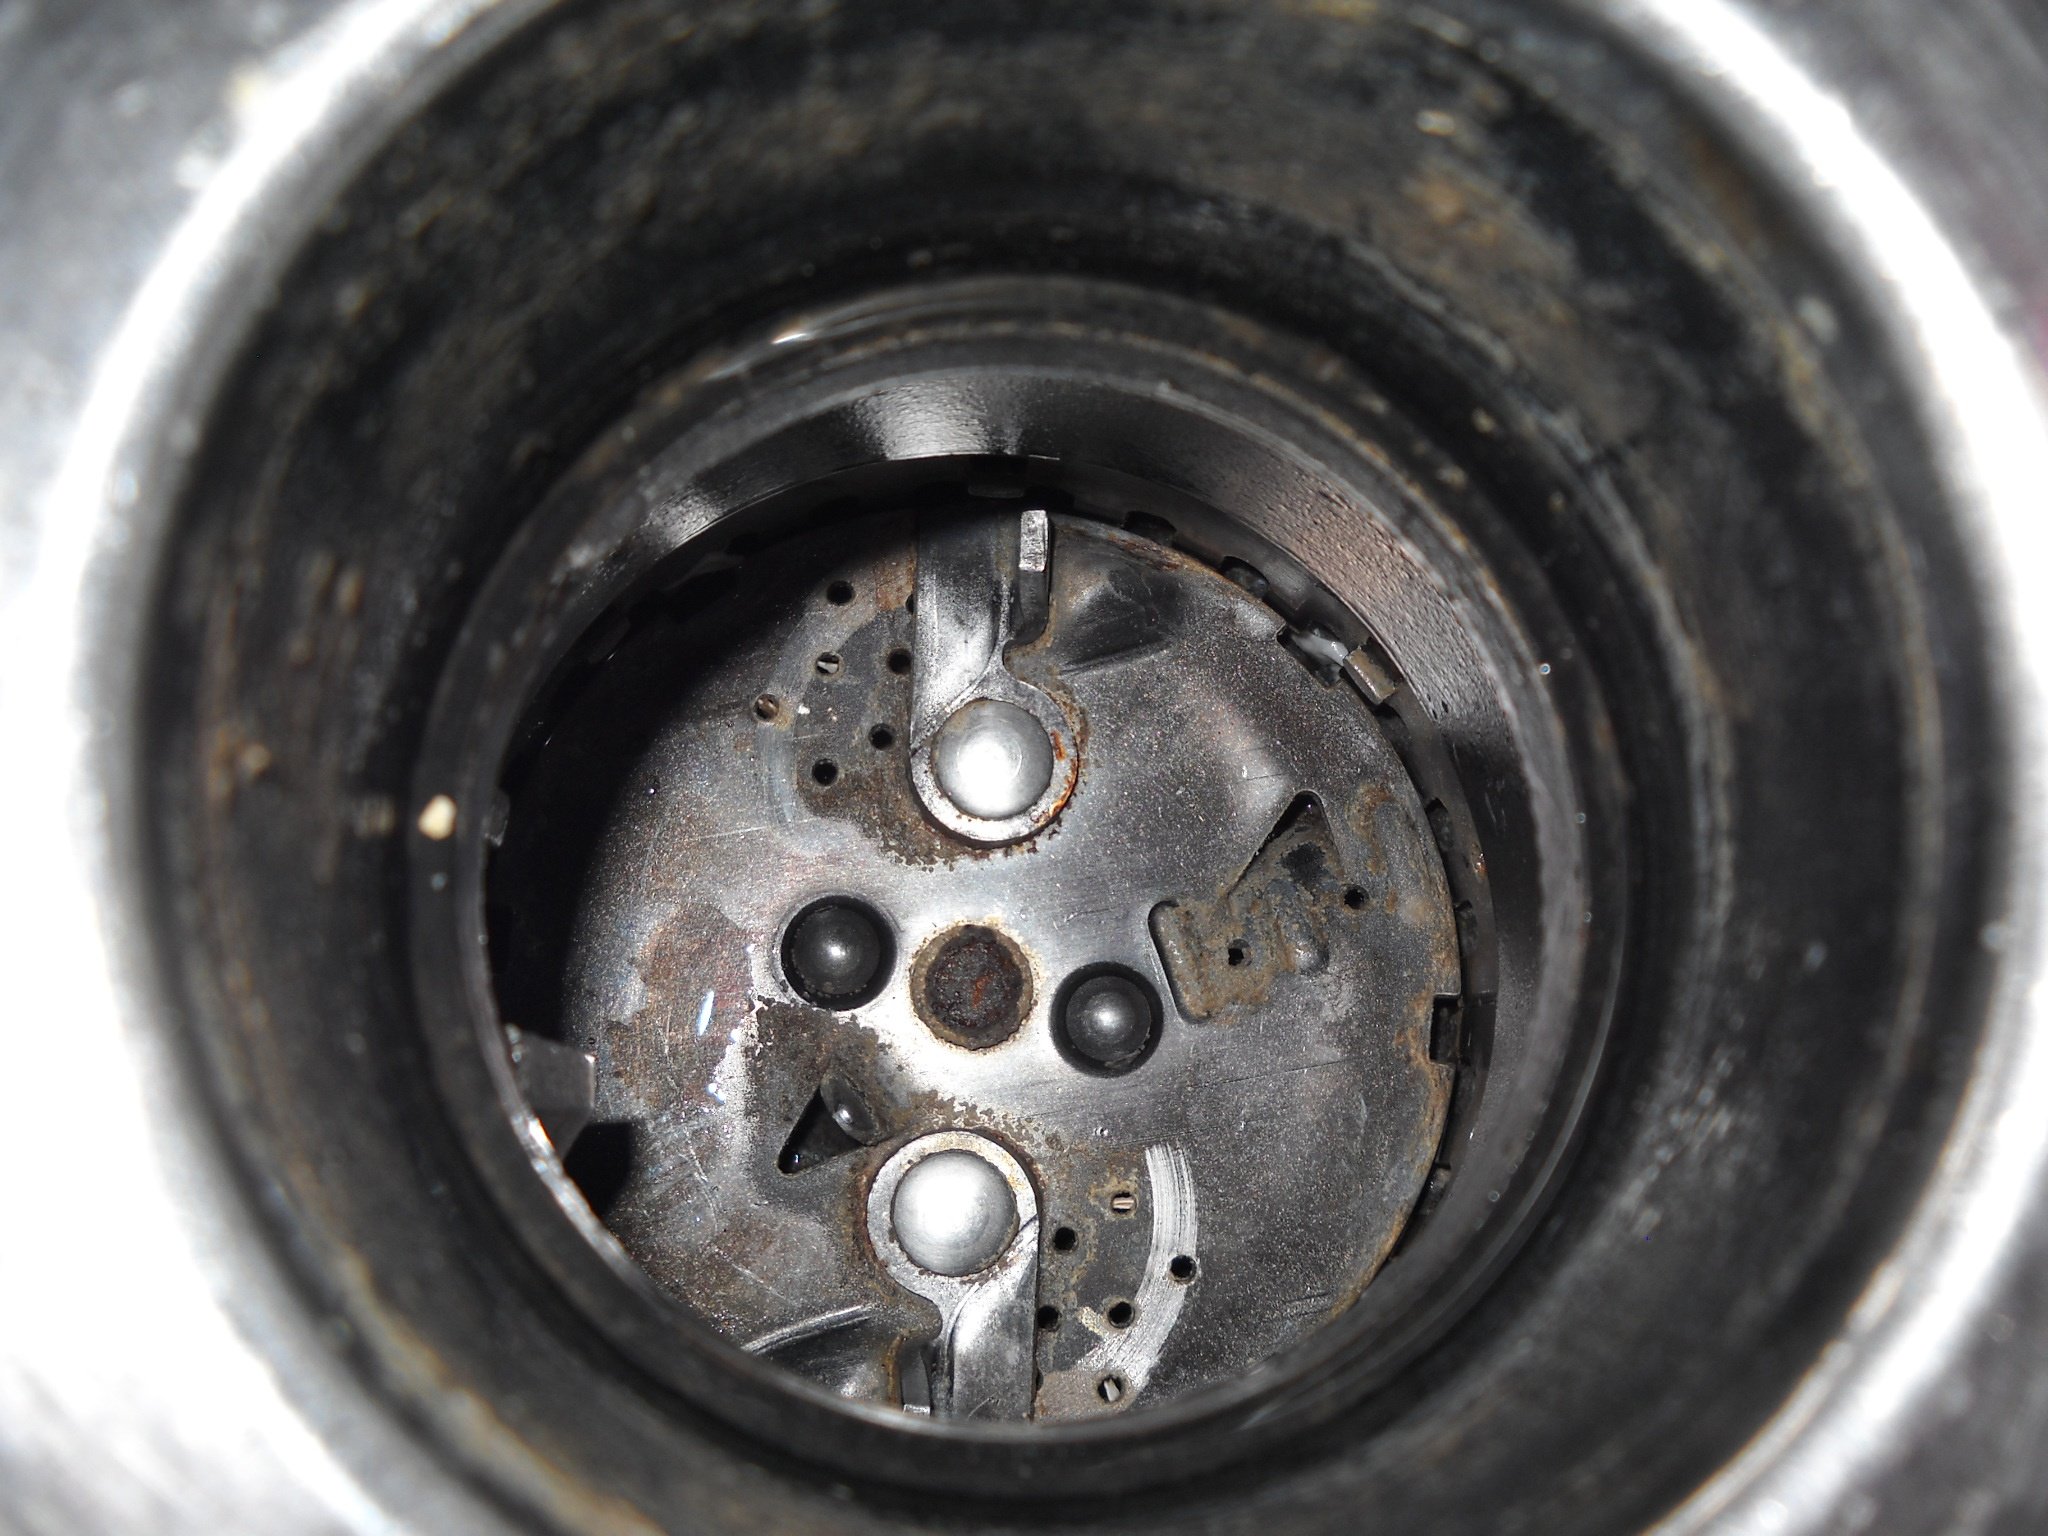 Jammed Garbage Disposal - How to Fix a Jammed Garbage Disposal